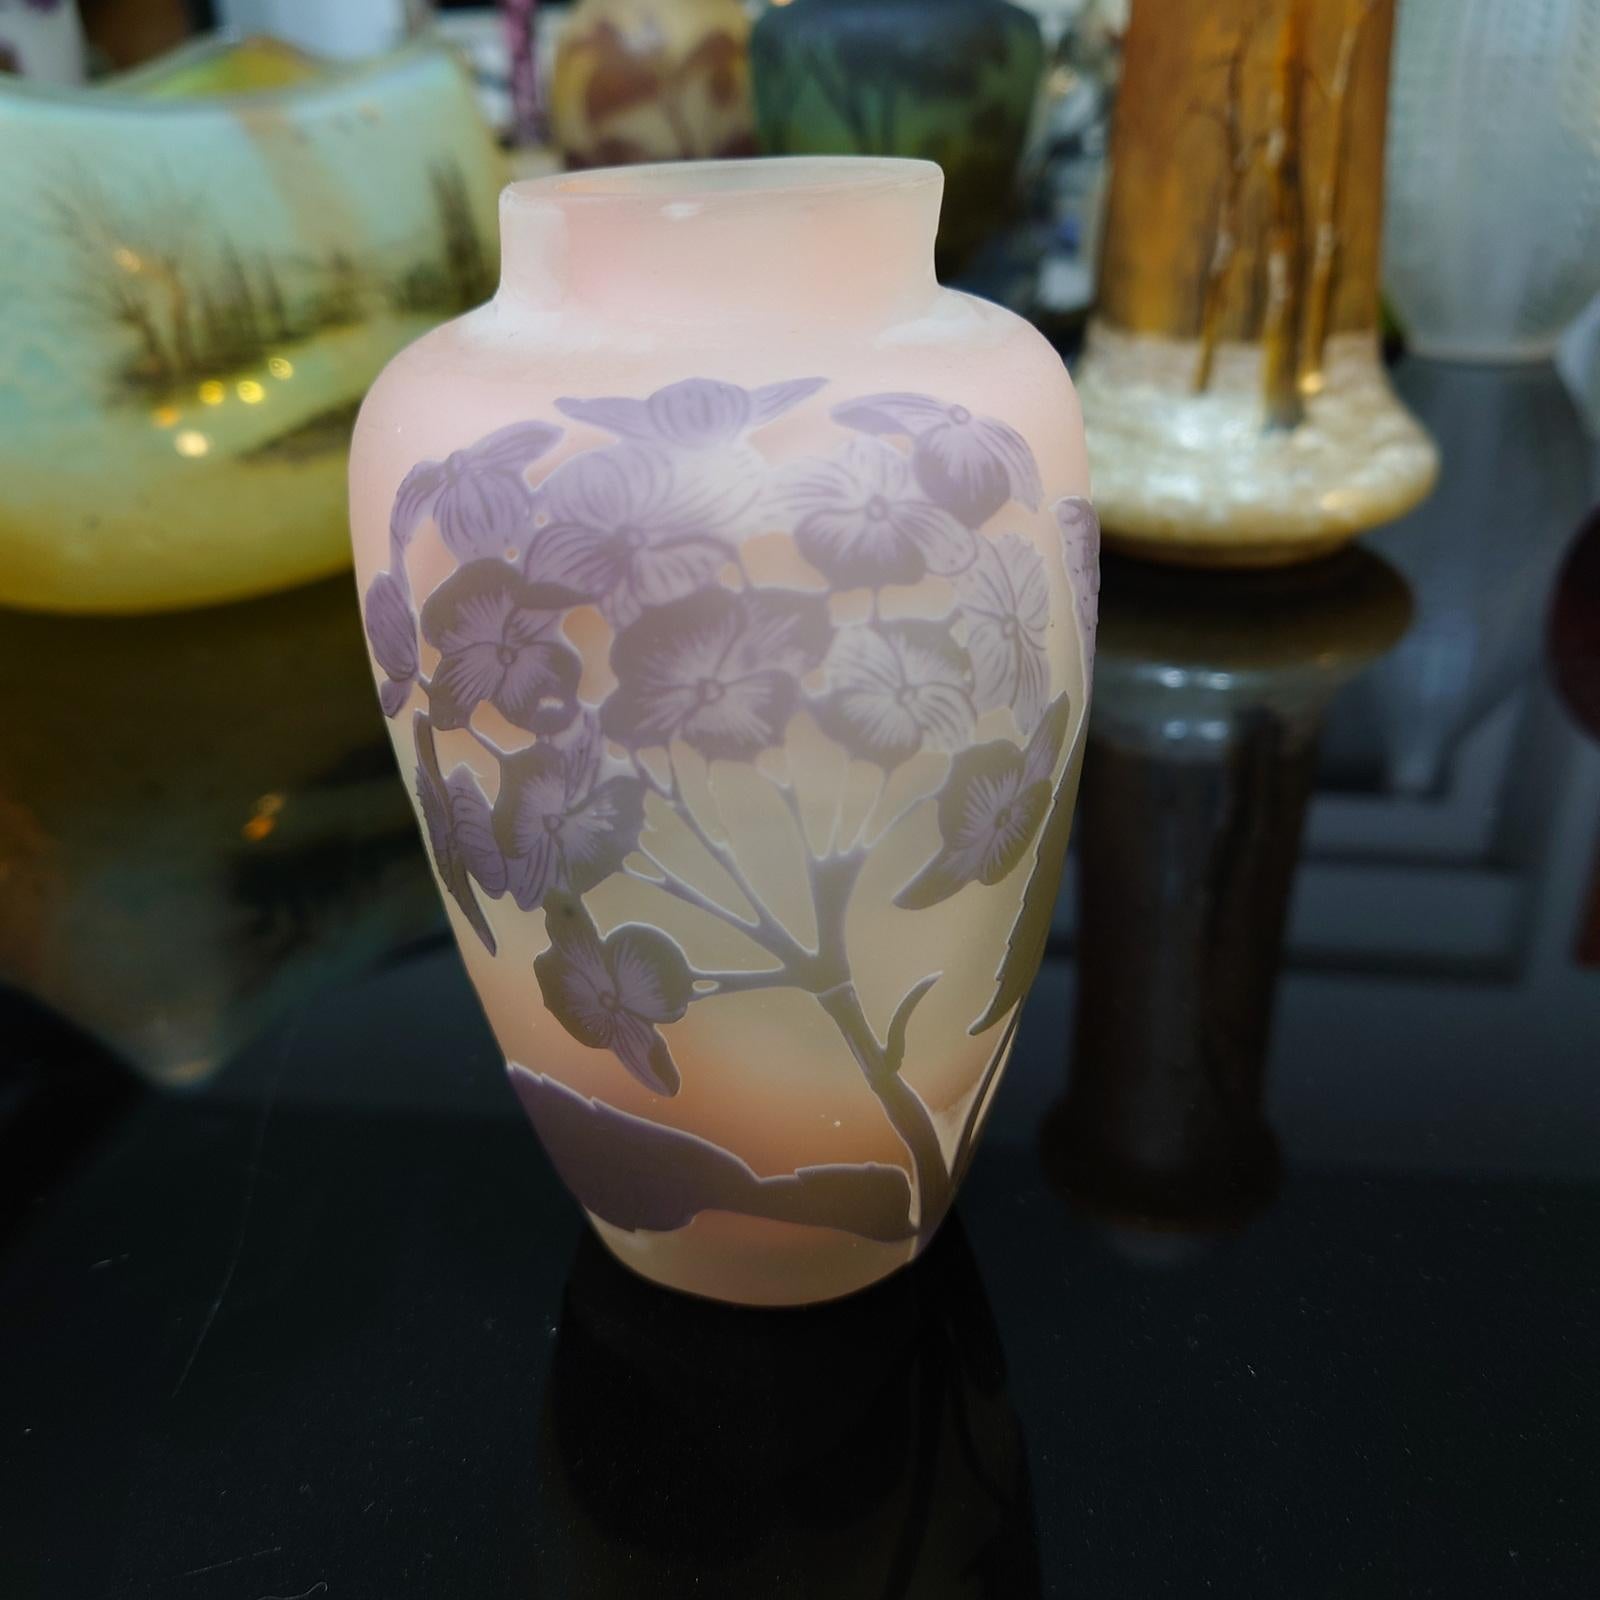 Emile Gallé, Nancy, Art Nouveau Cameo Vase with Hydrangeas - France ca. 1904.
Polychrome overlaid decoration with hydrangeas on a milky and pink background, marked Gallé with a star, 12 cm high, mouth slightly slanted.